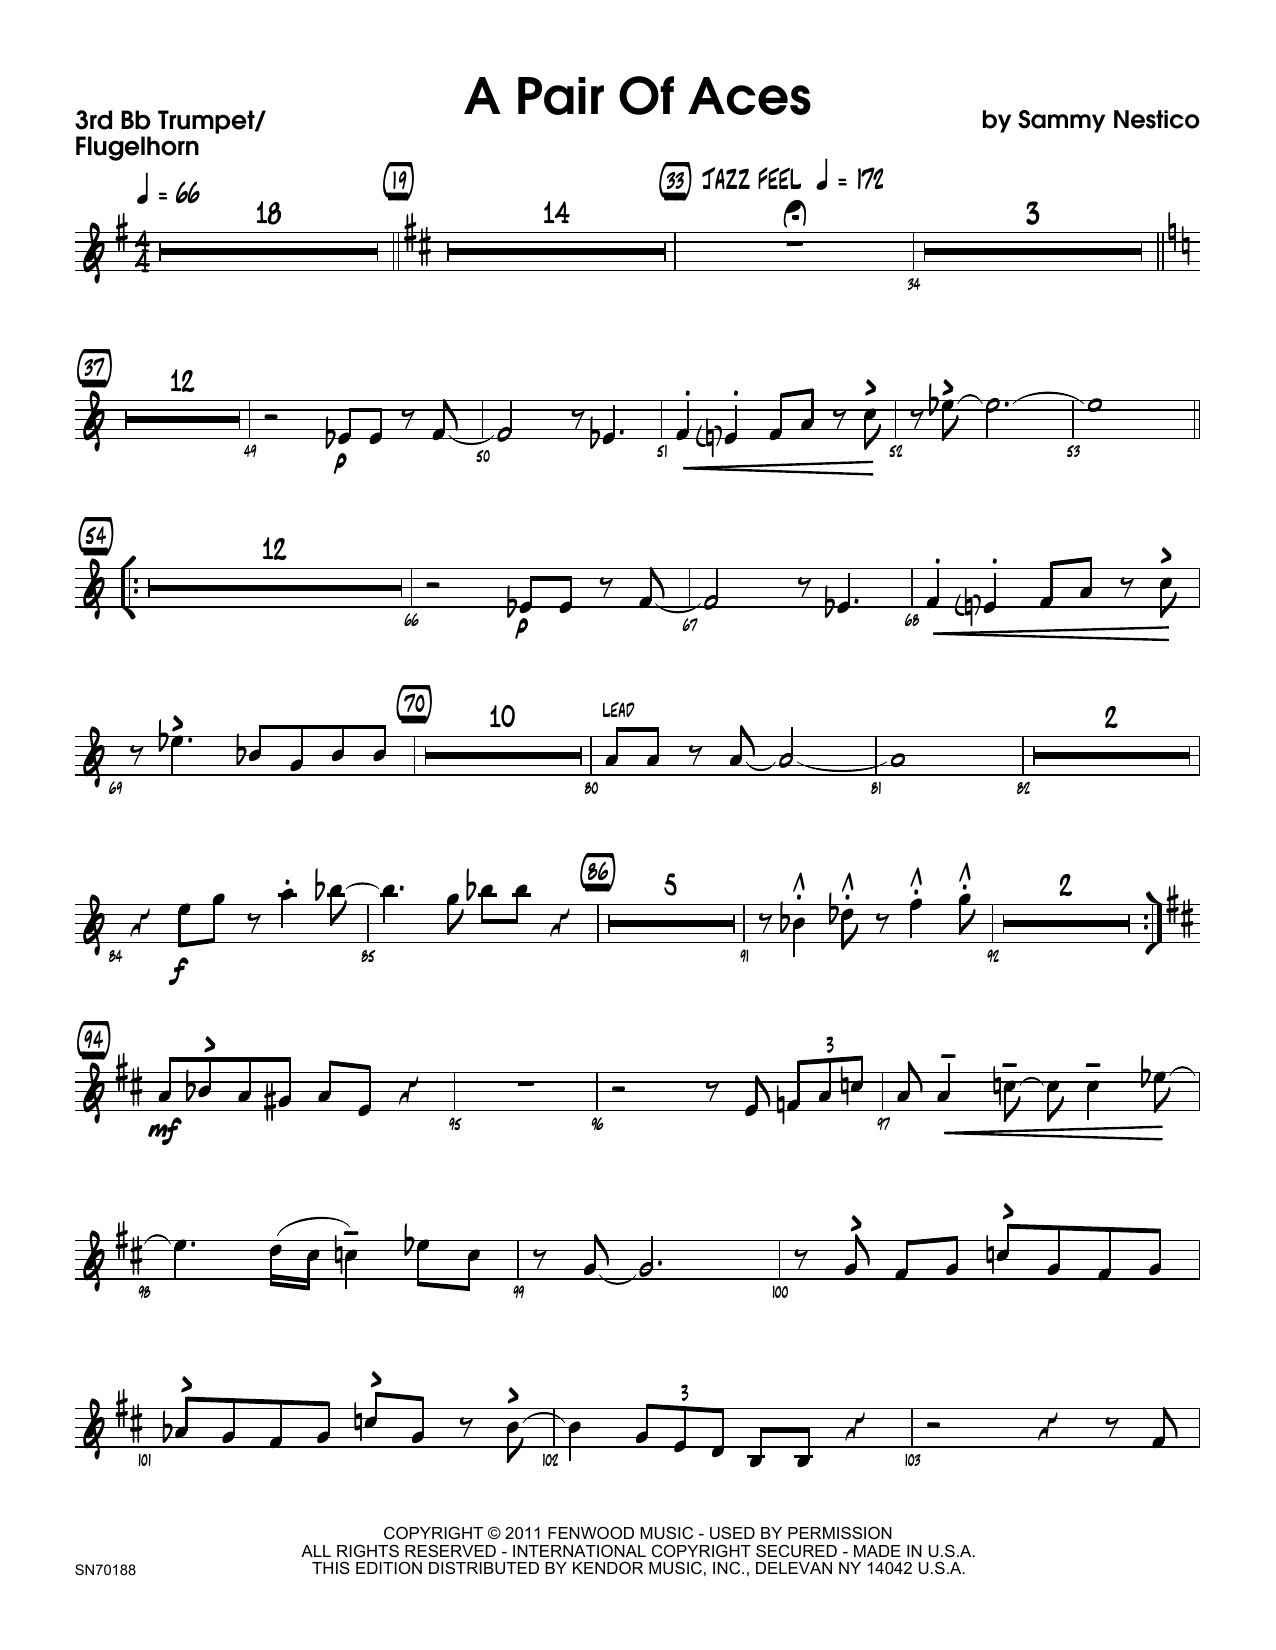 Download Sammy Nestico A Pair Of Aces - 3rd Bb Trumpet Sheet Music